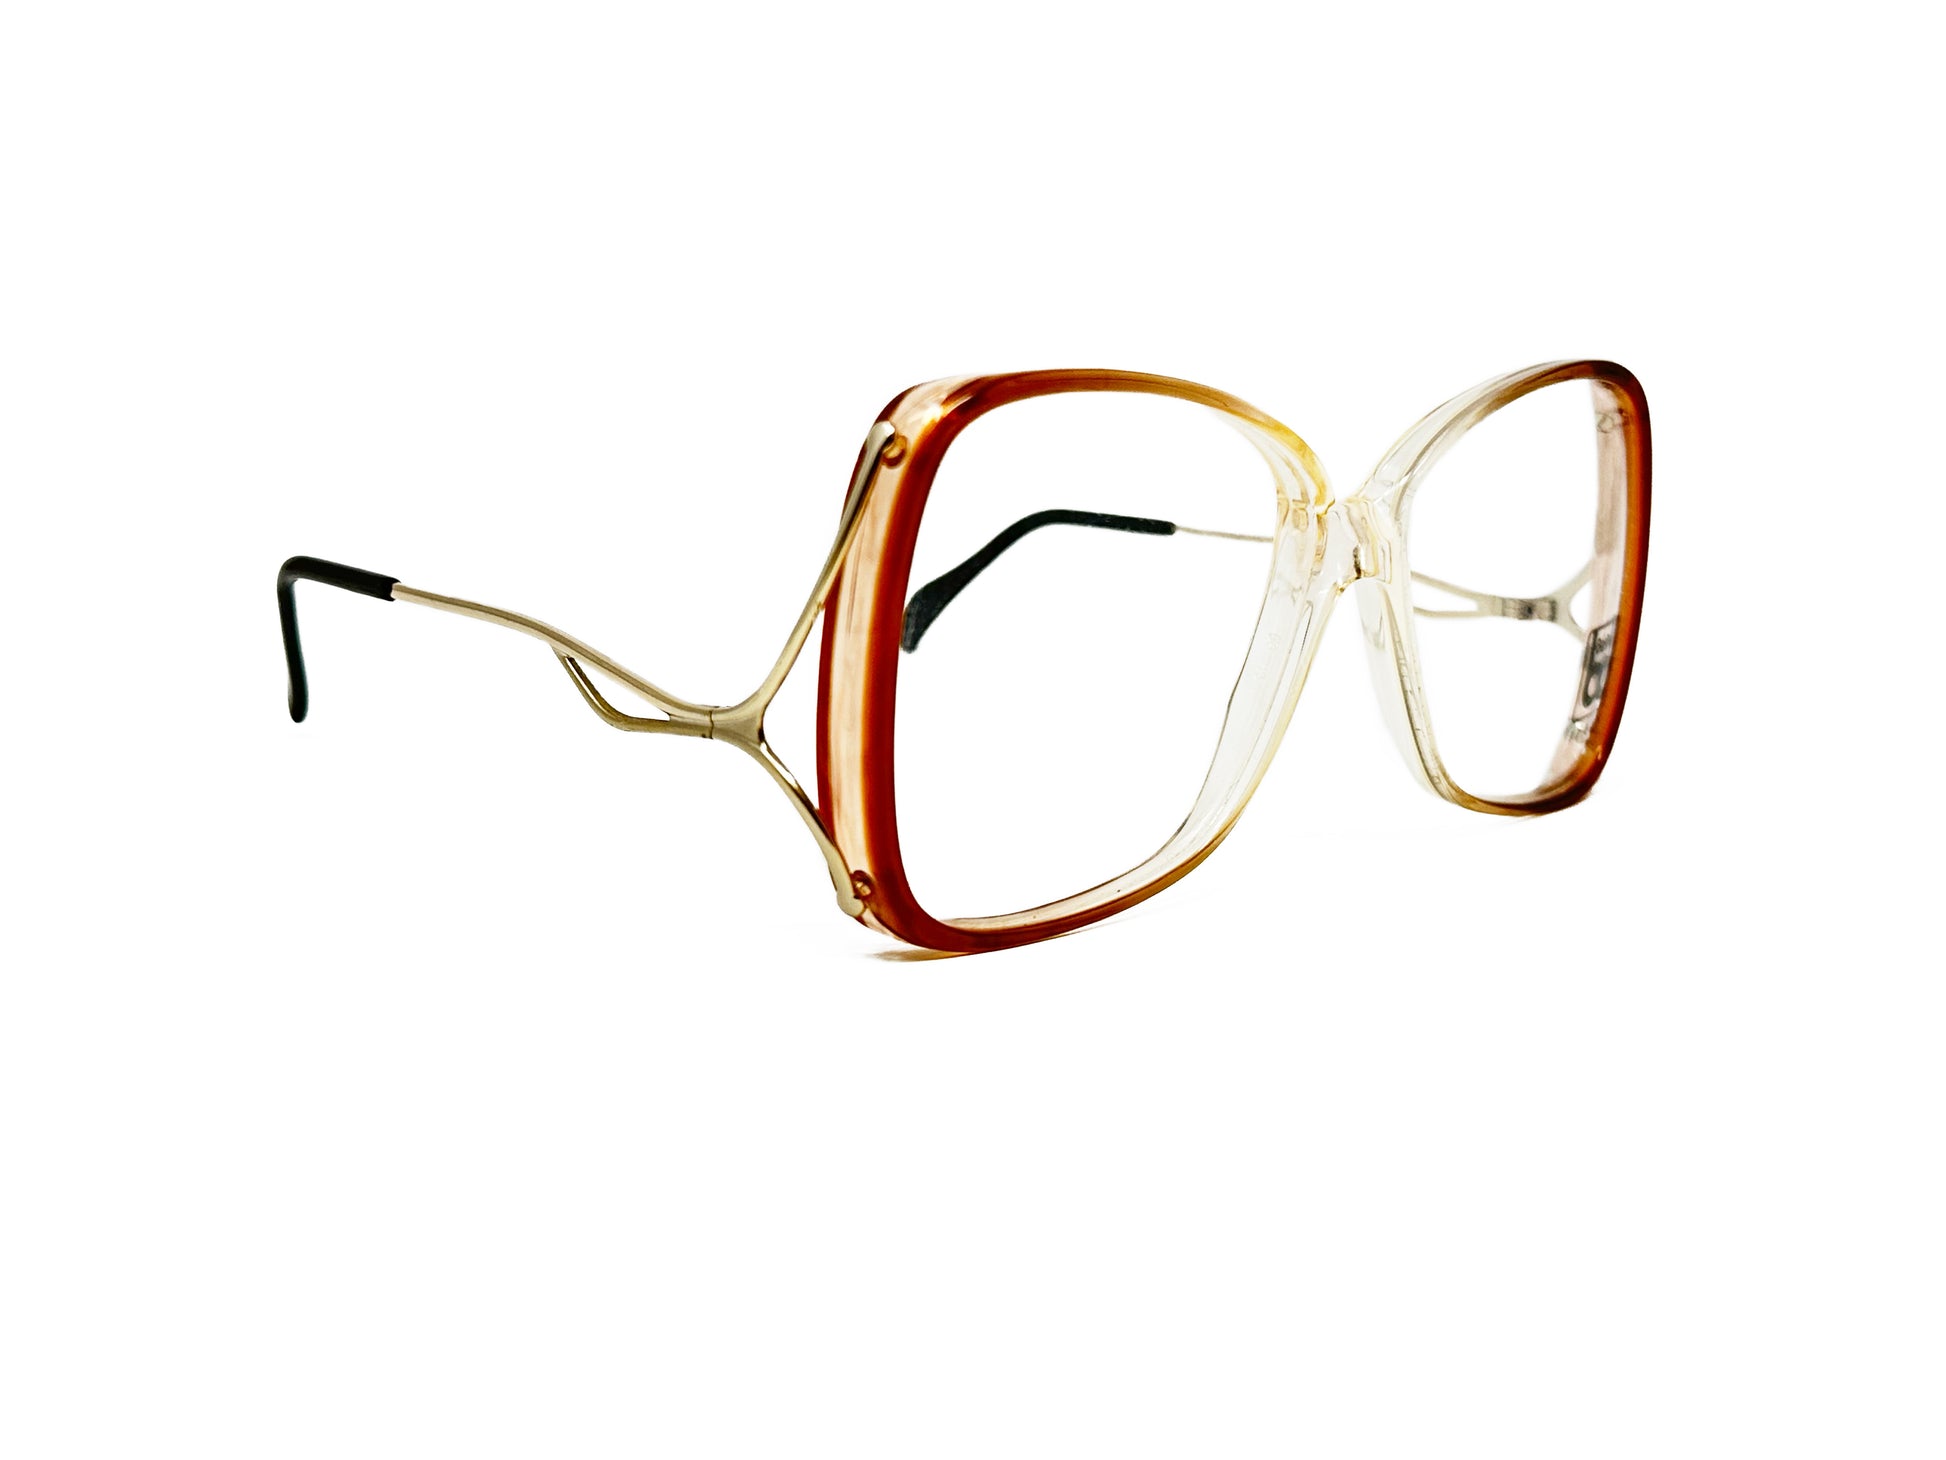 Berdel acetate, butterfly, optical frame. Model: 4079. Color: 076 - Transparent center to brown gradient. Side view.